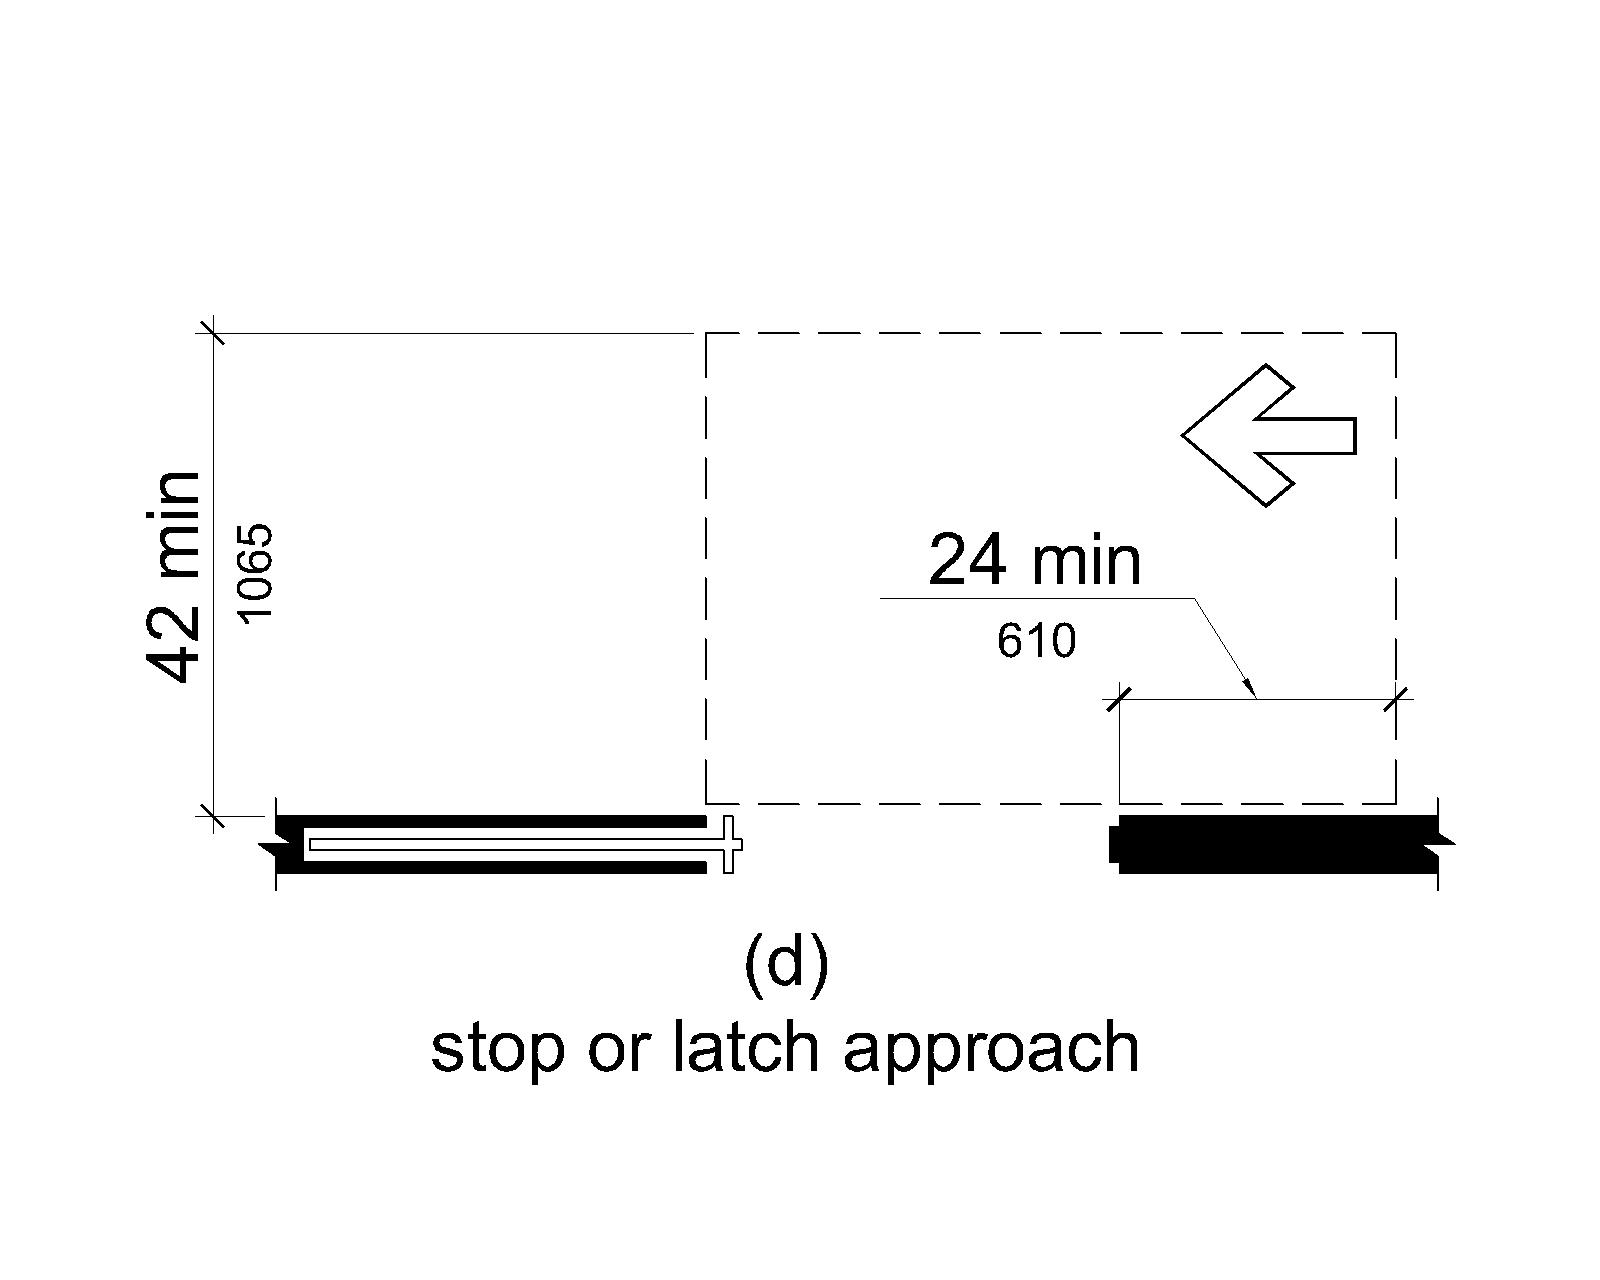 Figure (d) shows a stop or latch approach. Maneuvering clearance extends 24 inches (610 mm) from the stop or latch side and is 42 inches (1065 mm) minimum perpendicular to the doorway.